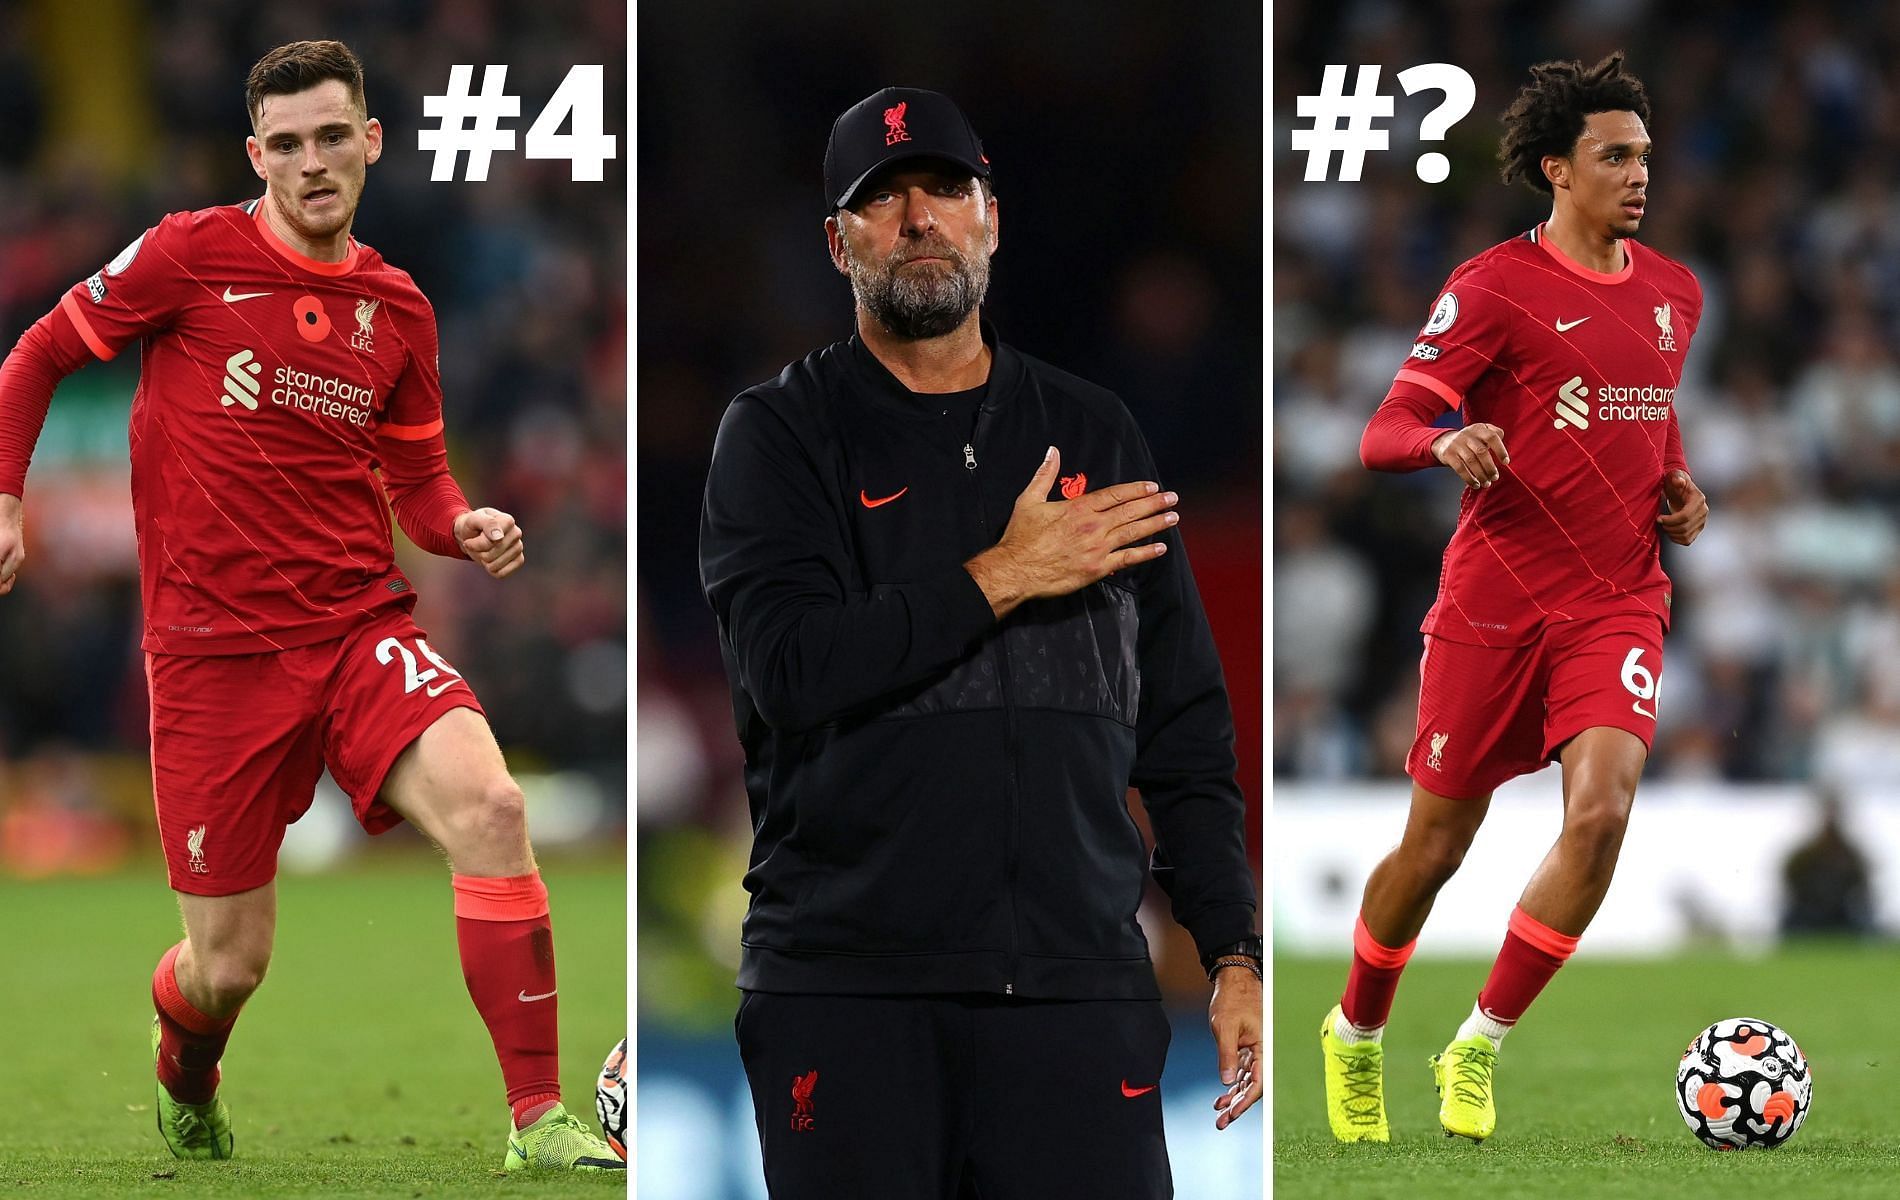 Who is the greatest defender to play under Klopp?